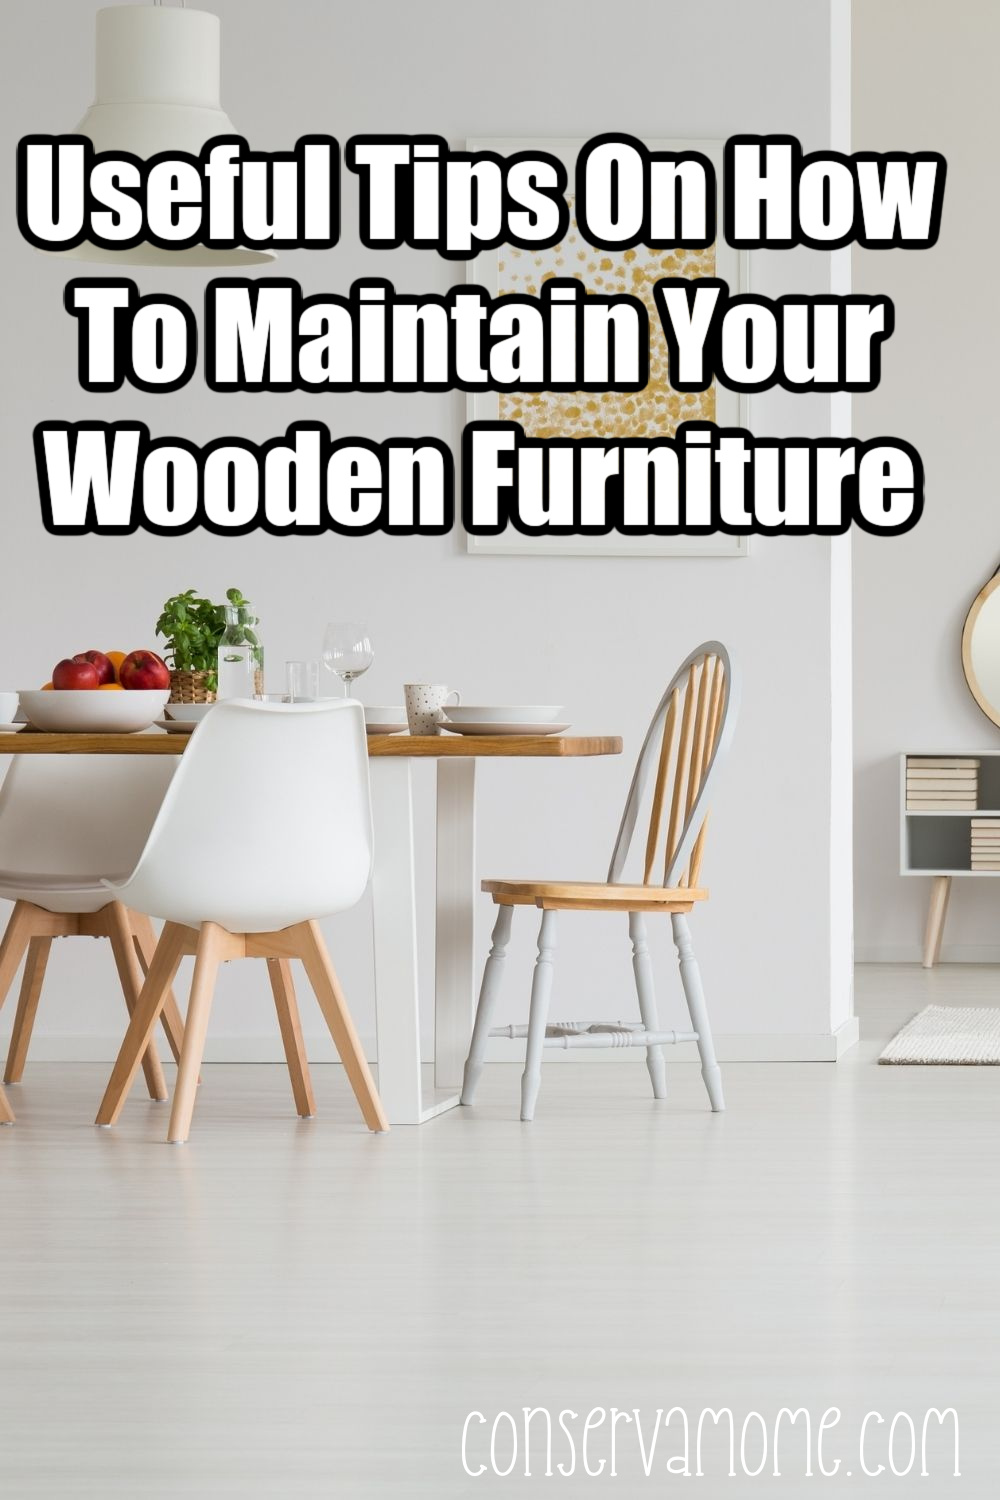 Useful Tips On How To Maintain Your Wooden Furniture